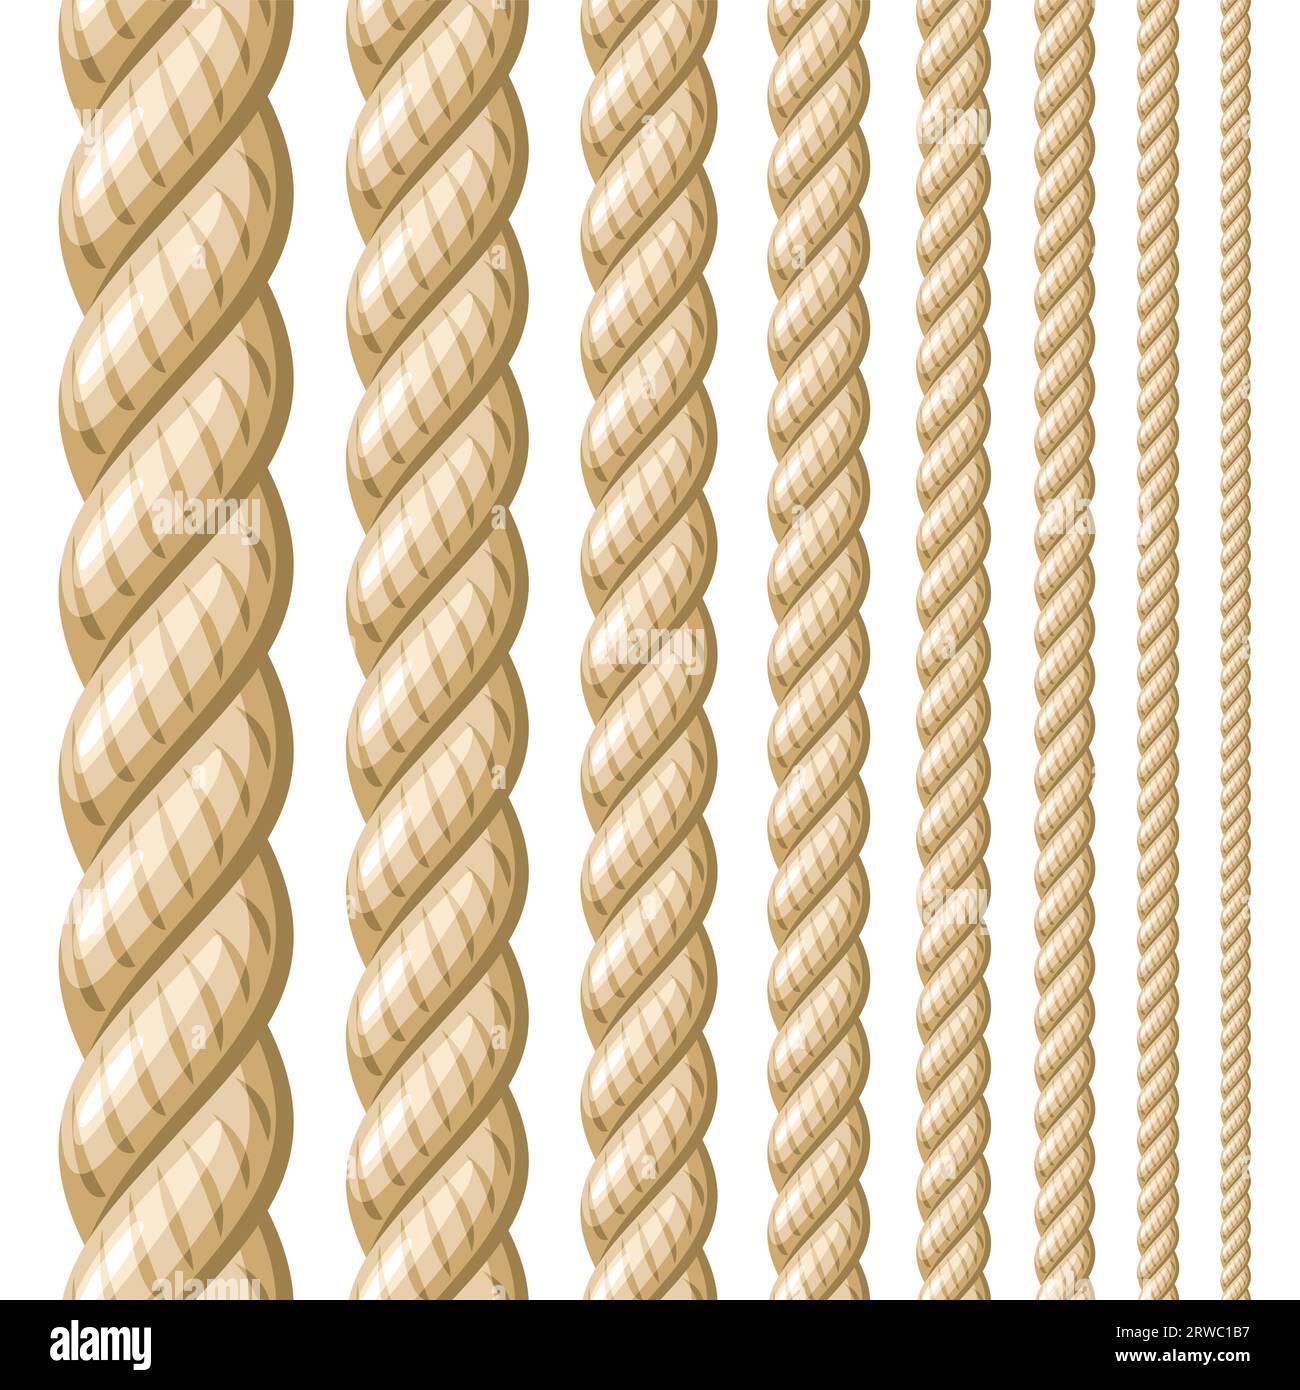 Vector Seamless Rope Set, group of illustration vertical decorative natural long ropes, collection of many different repeating hemp ropes on white bac Stock Vector